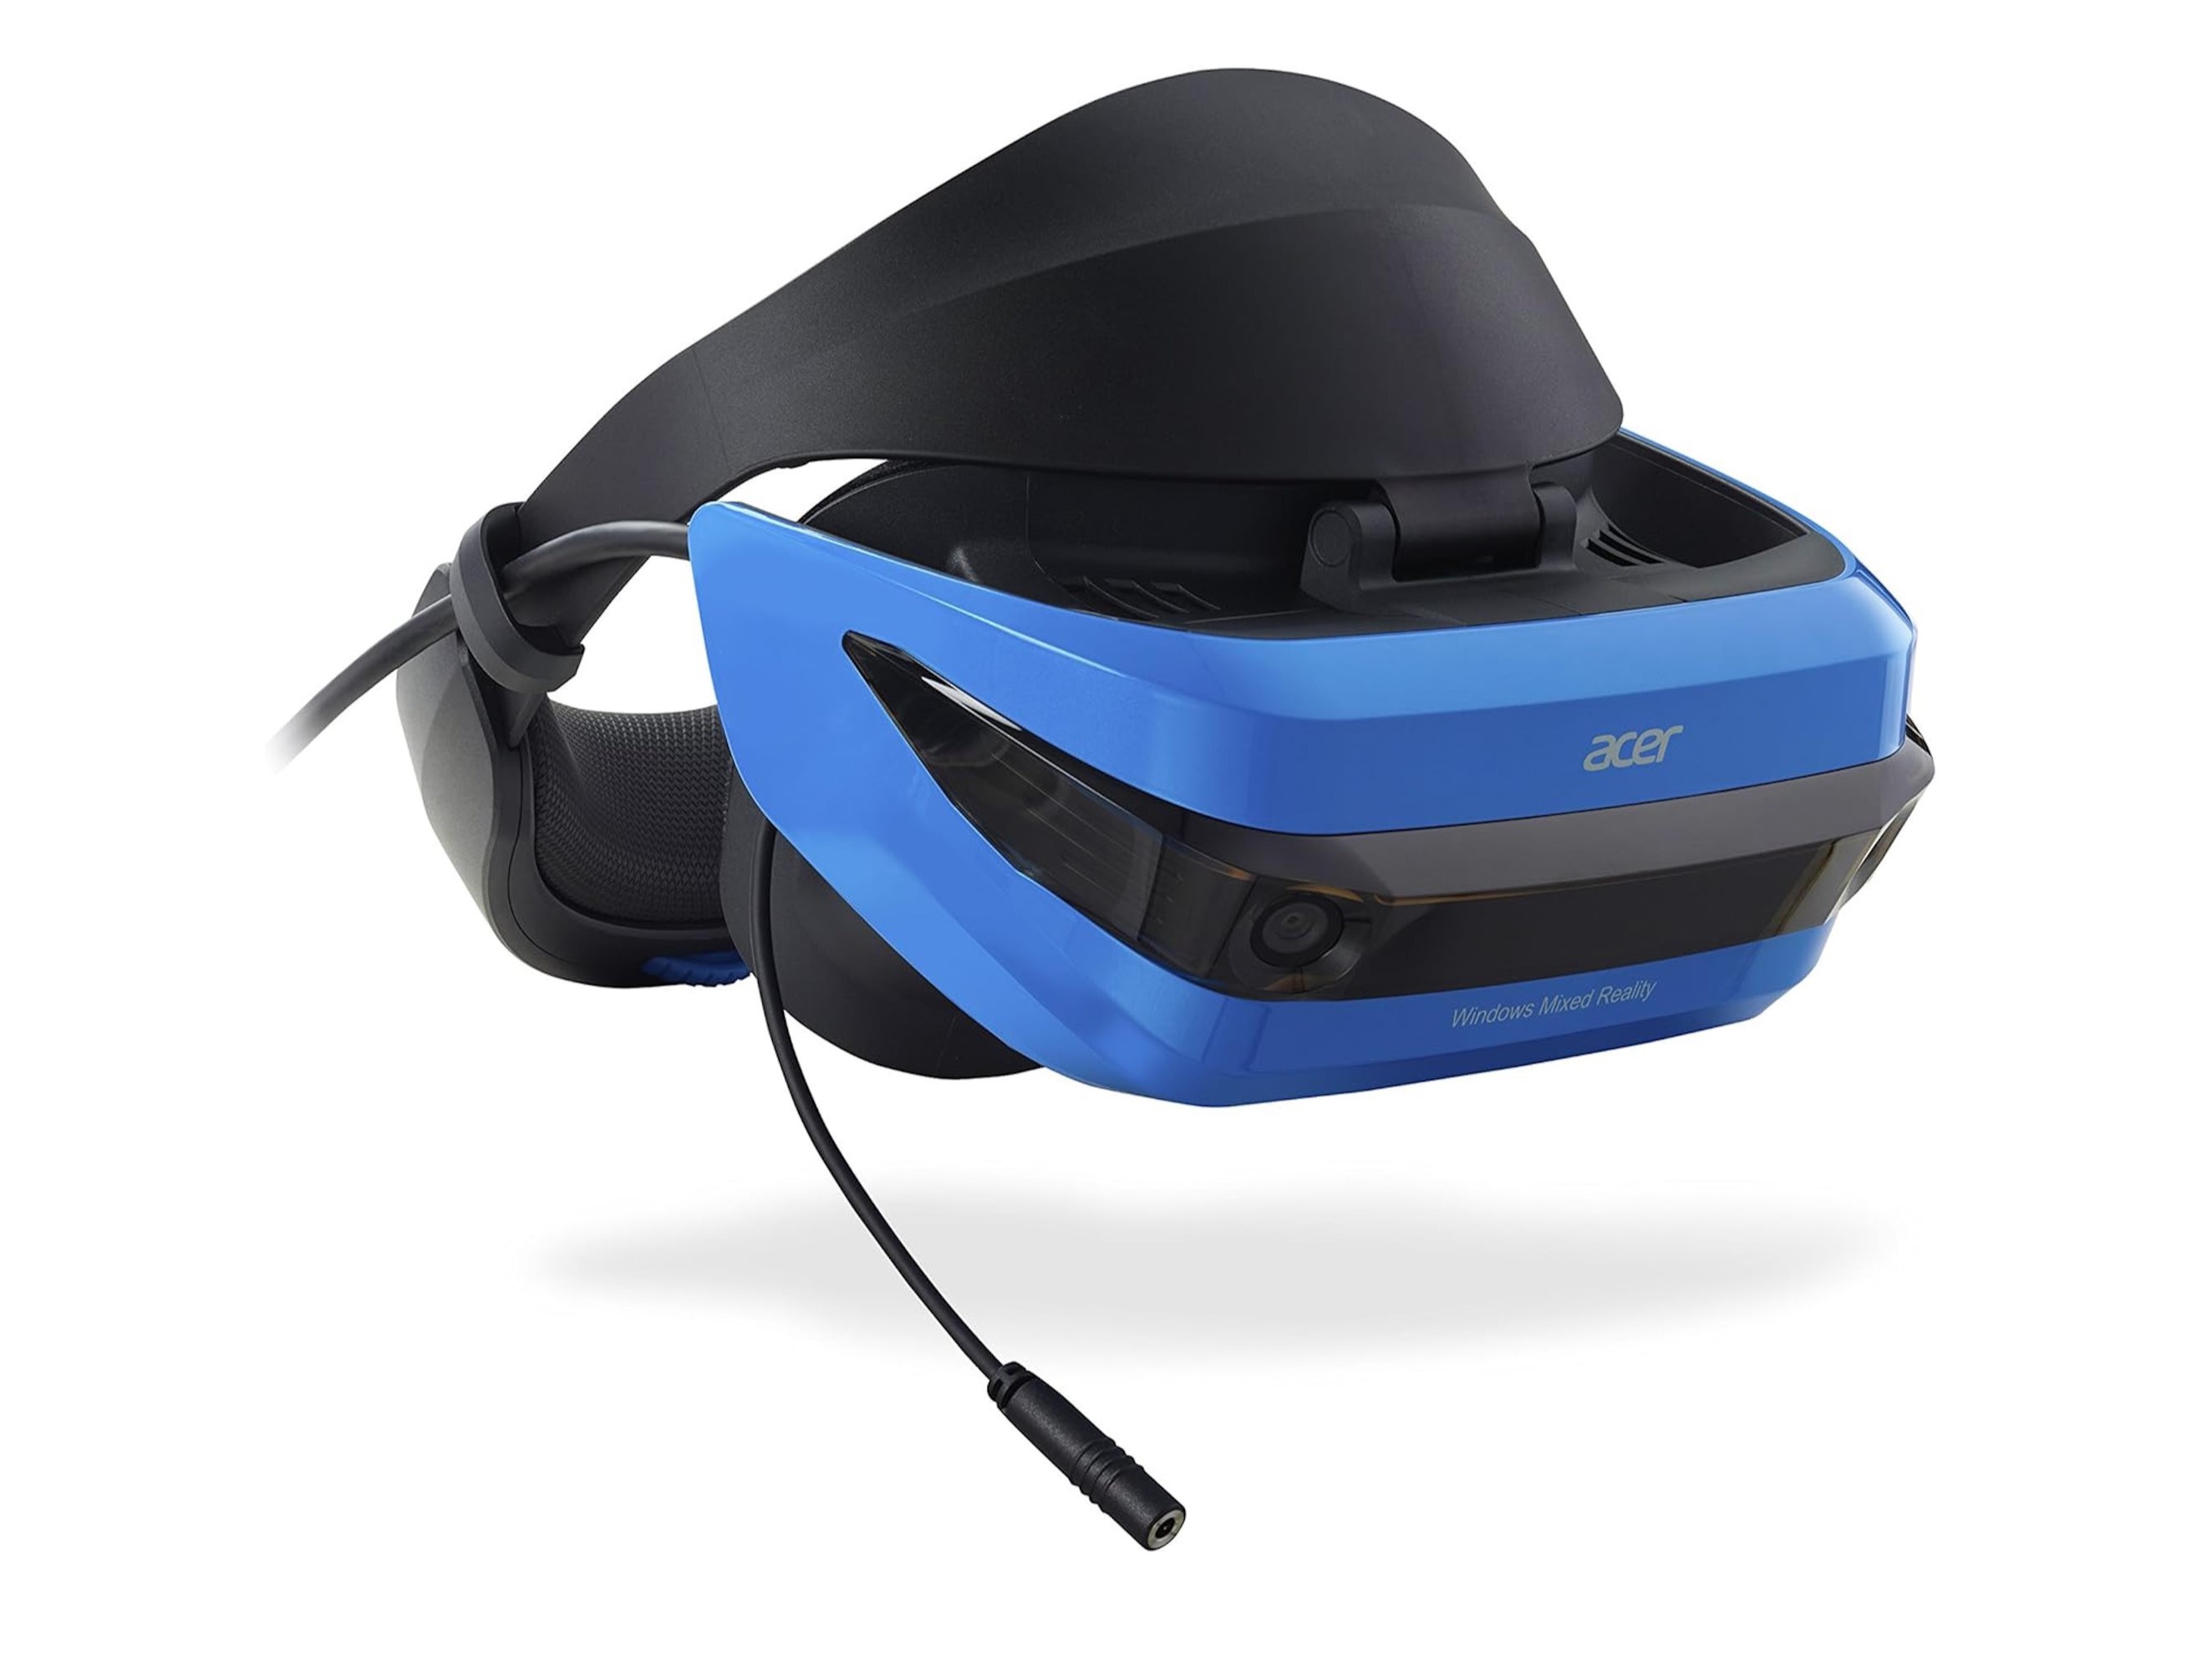 Windows comments on the discontinuation of Windows Mixed Reality: VR headsets likely to become electronic waste in the long term